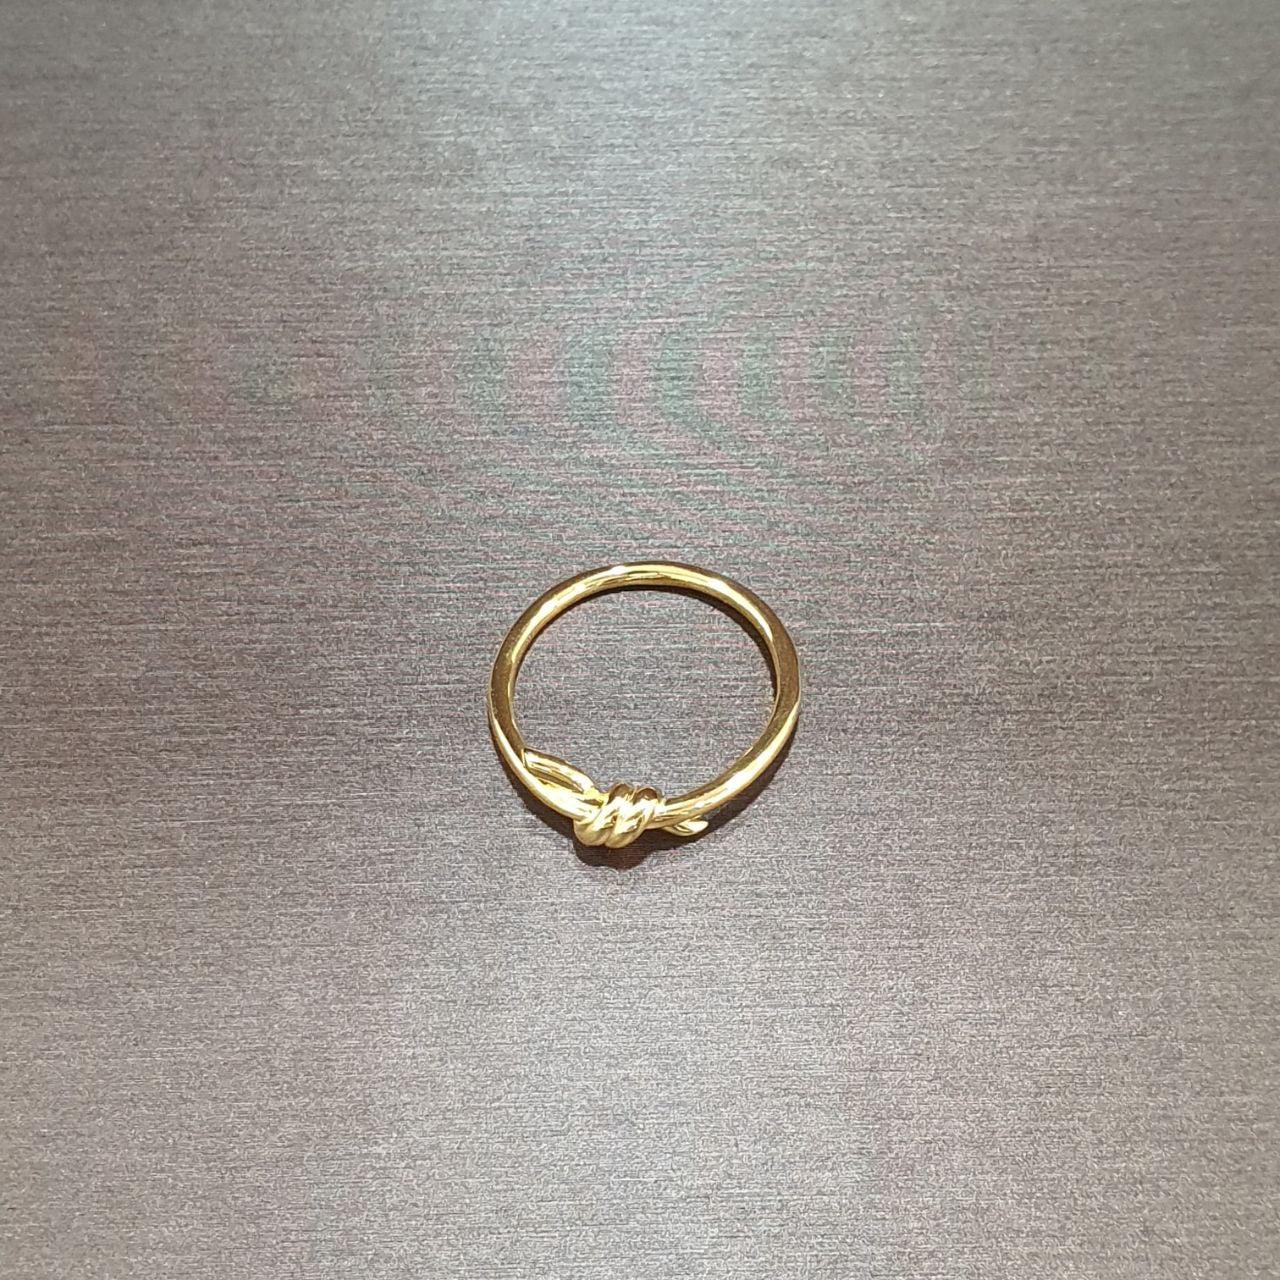 22k / 916 Gold Rope Knot Ring-Rings-Best Gold Shop